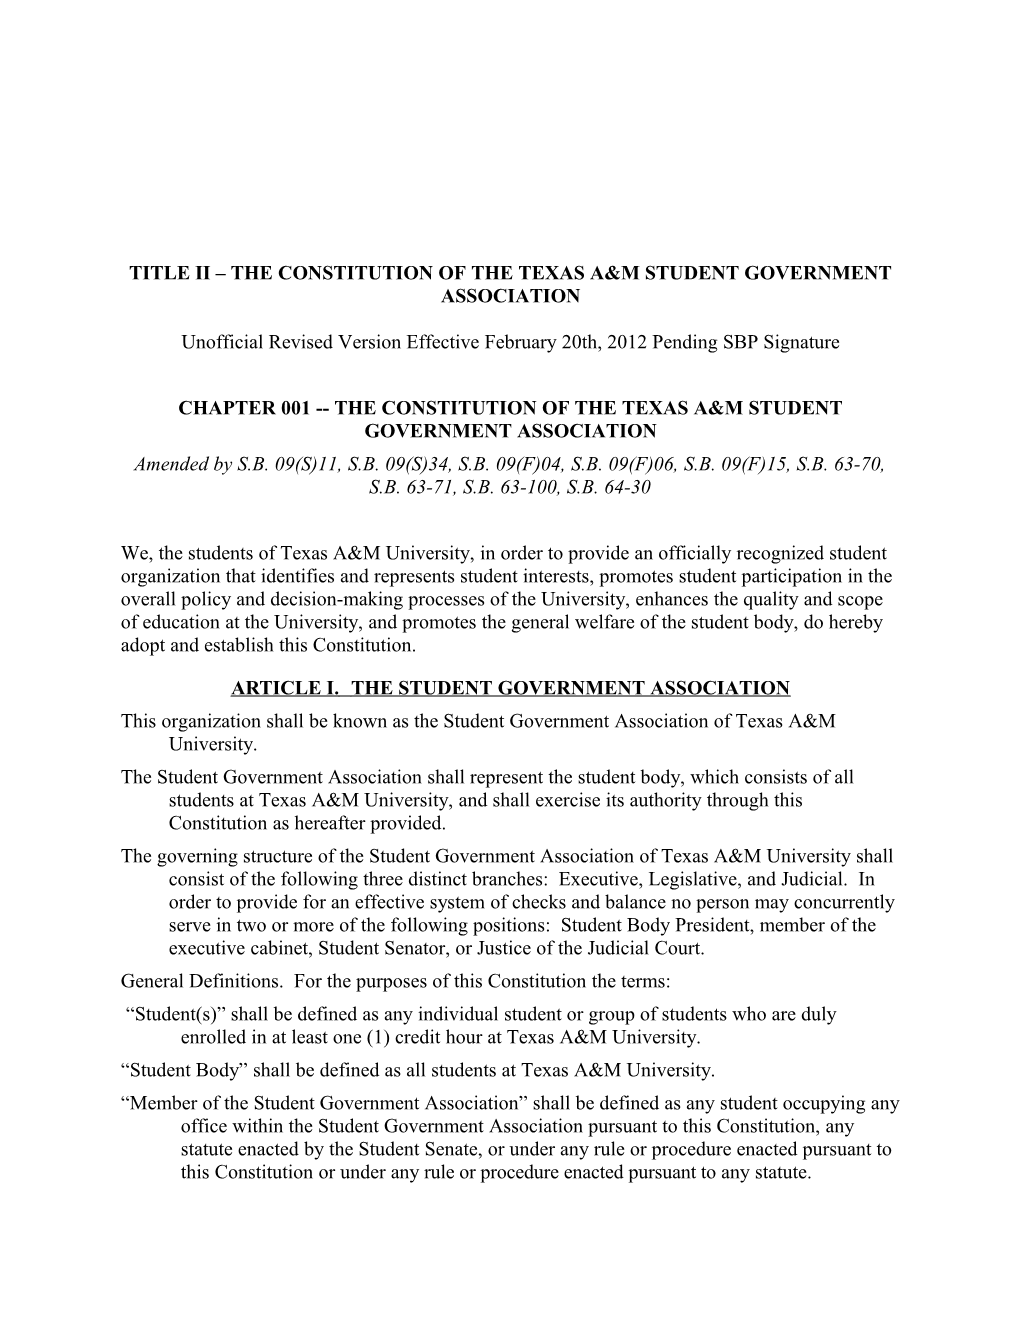 Chapter 001 the Constitution of the Texas A&M Student Government Association